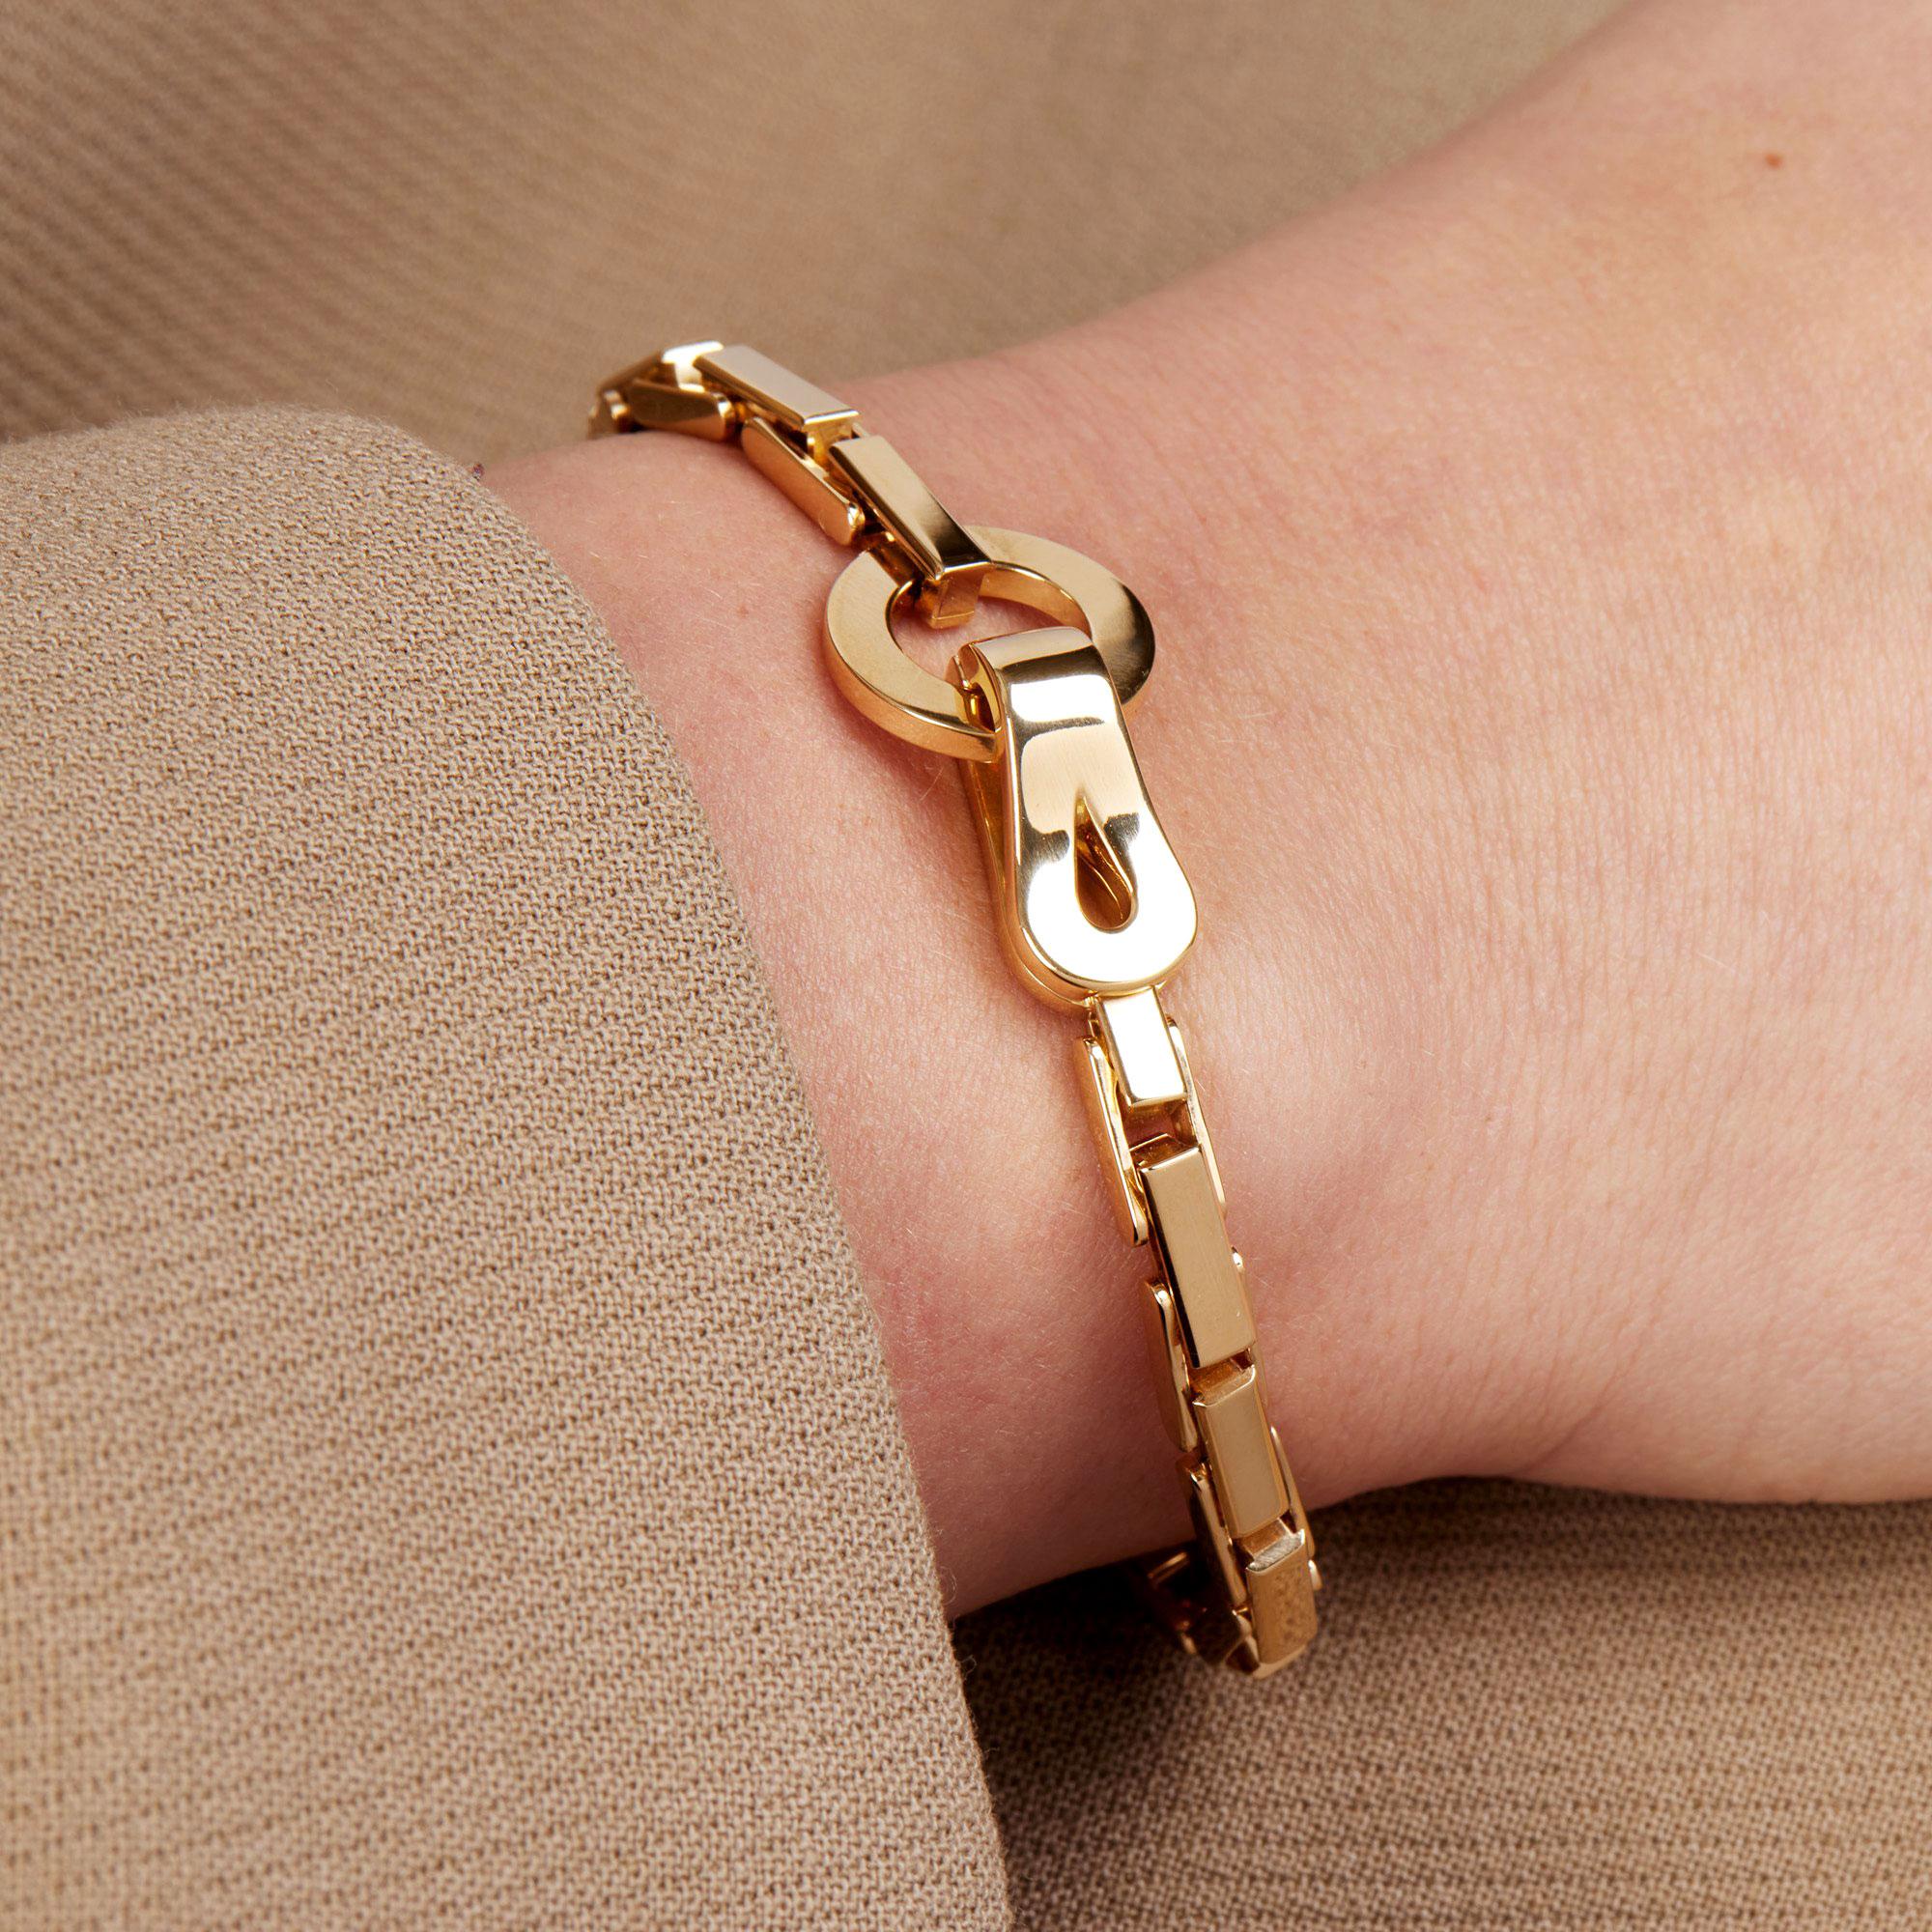 This bracelet by Cartier is from their Agrafe Collection and features a fastening inspired by a traditional hook and eye style. Accompanied by a Cartier Box and Certificate. Our Xupes reference is J905 should you need to quote this.

ITEM